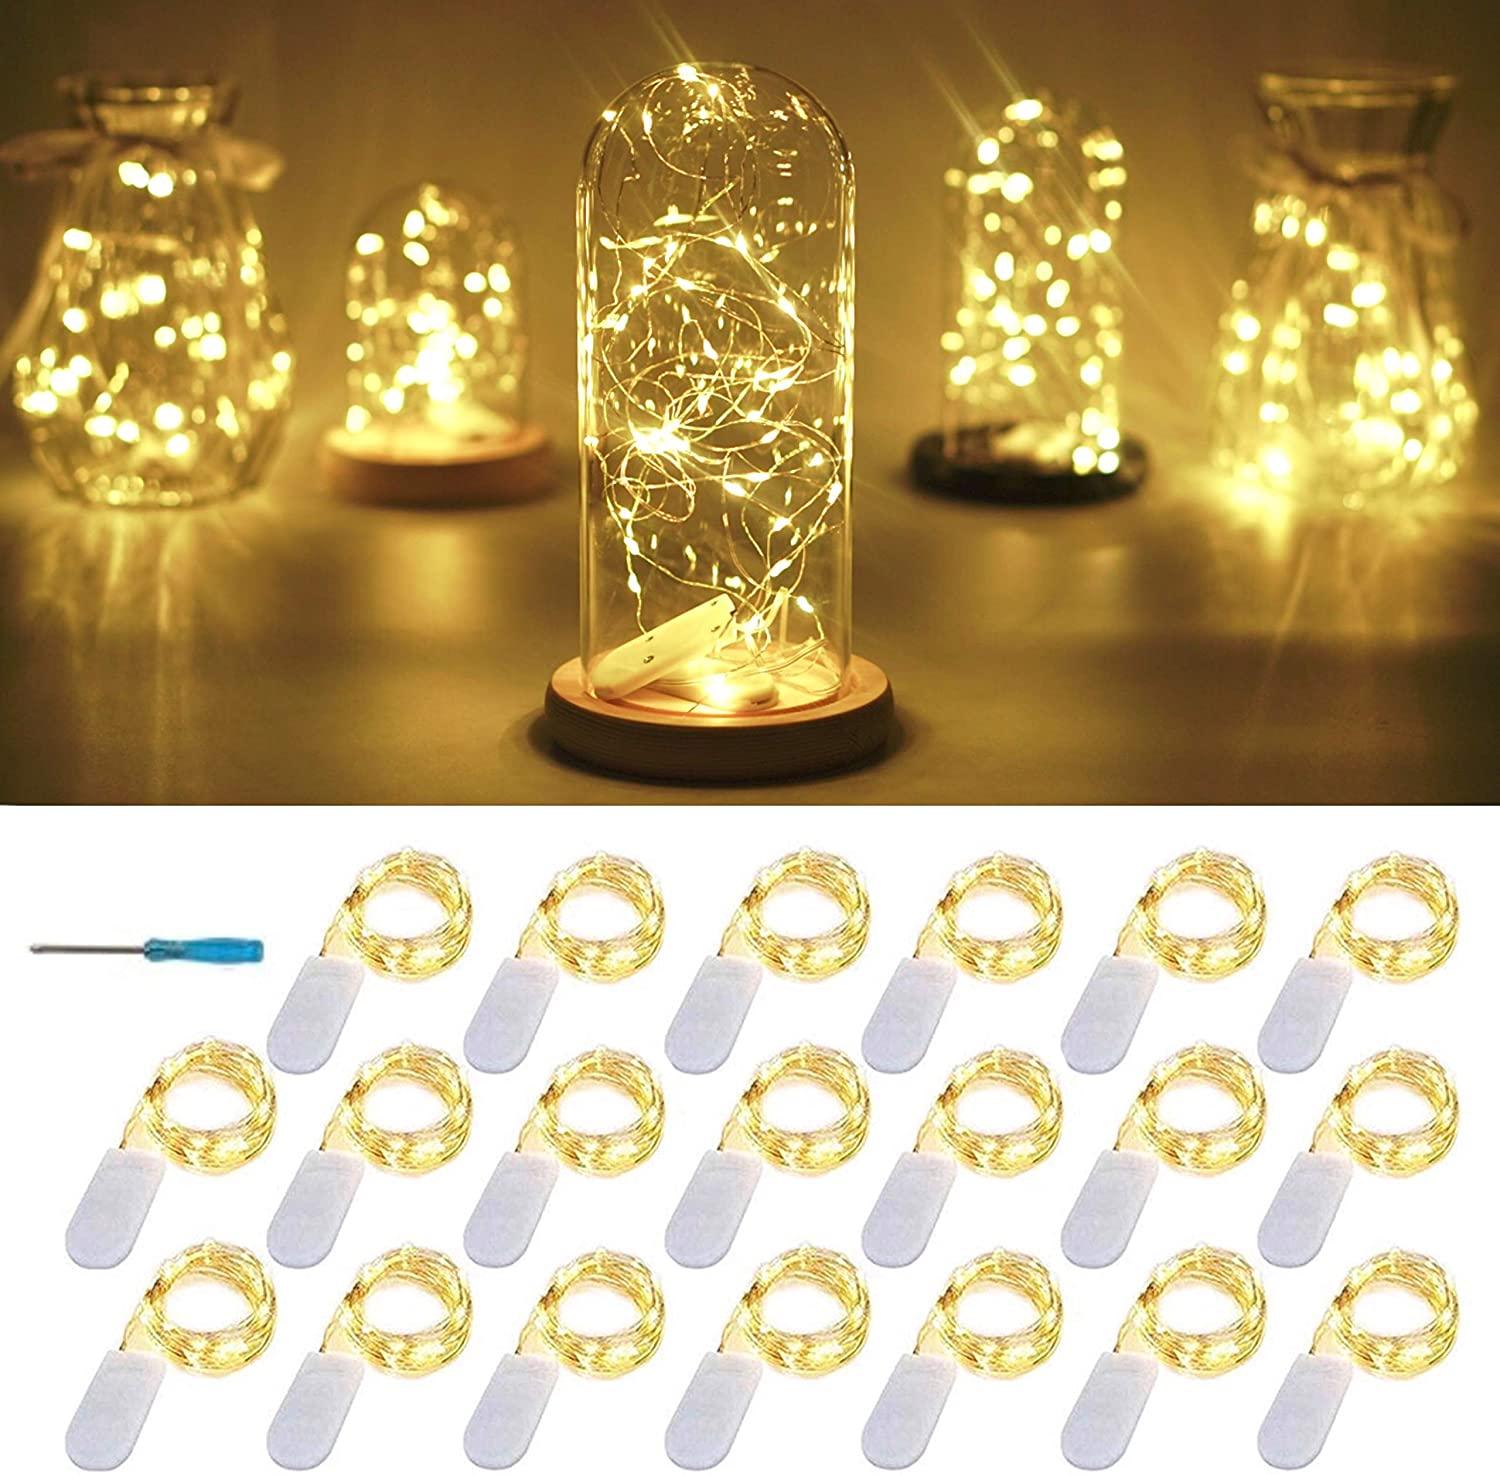 20 Packs 6.6FT 20 LEDs Battery Operated Fairy String Lights for DIY Party Christmas Costume Wedding Easter Table Decorations - If you say i do